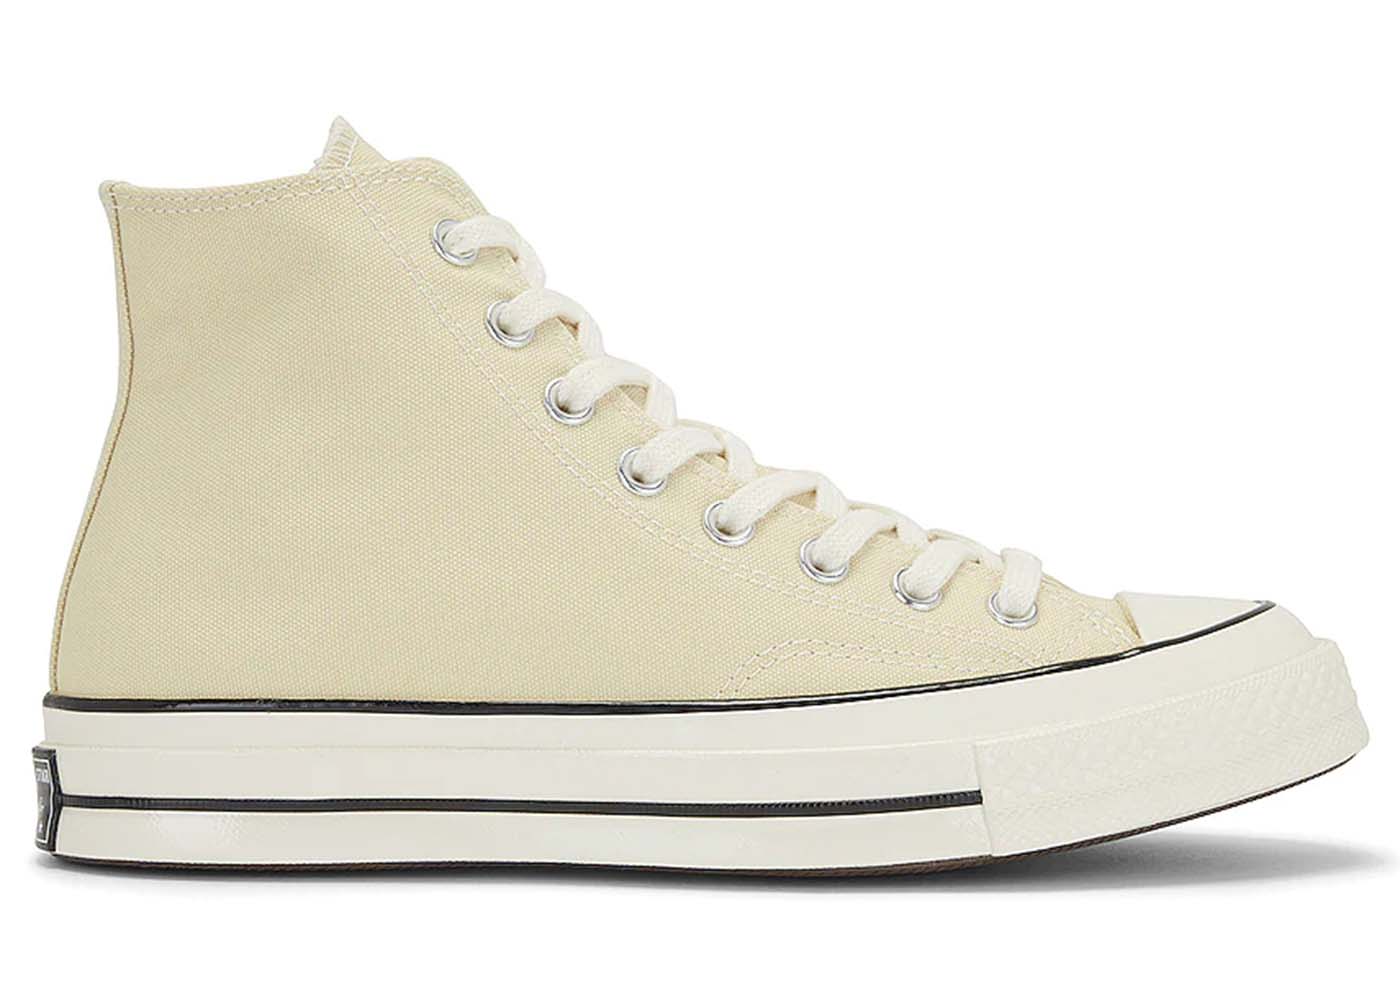 Converse Chuck Taylor All Star 70 Hi Recycled Canvas Light Armory